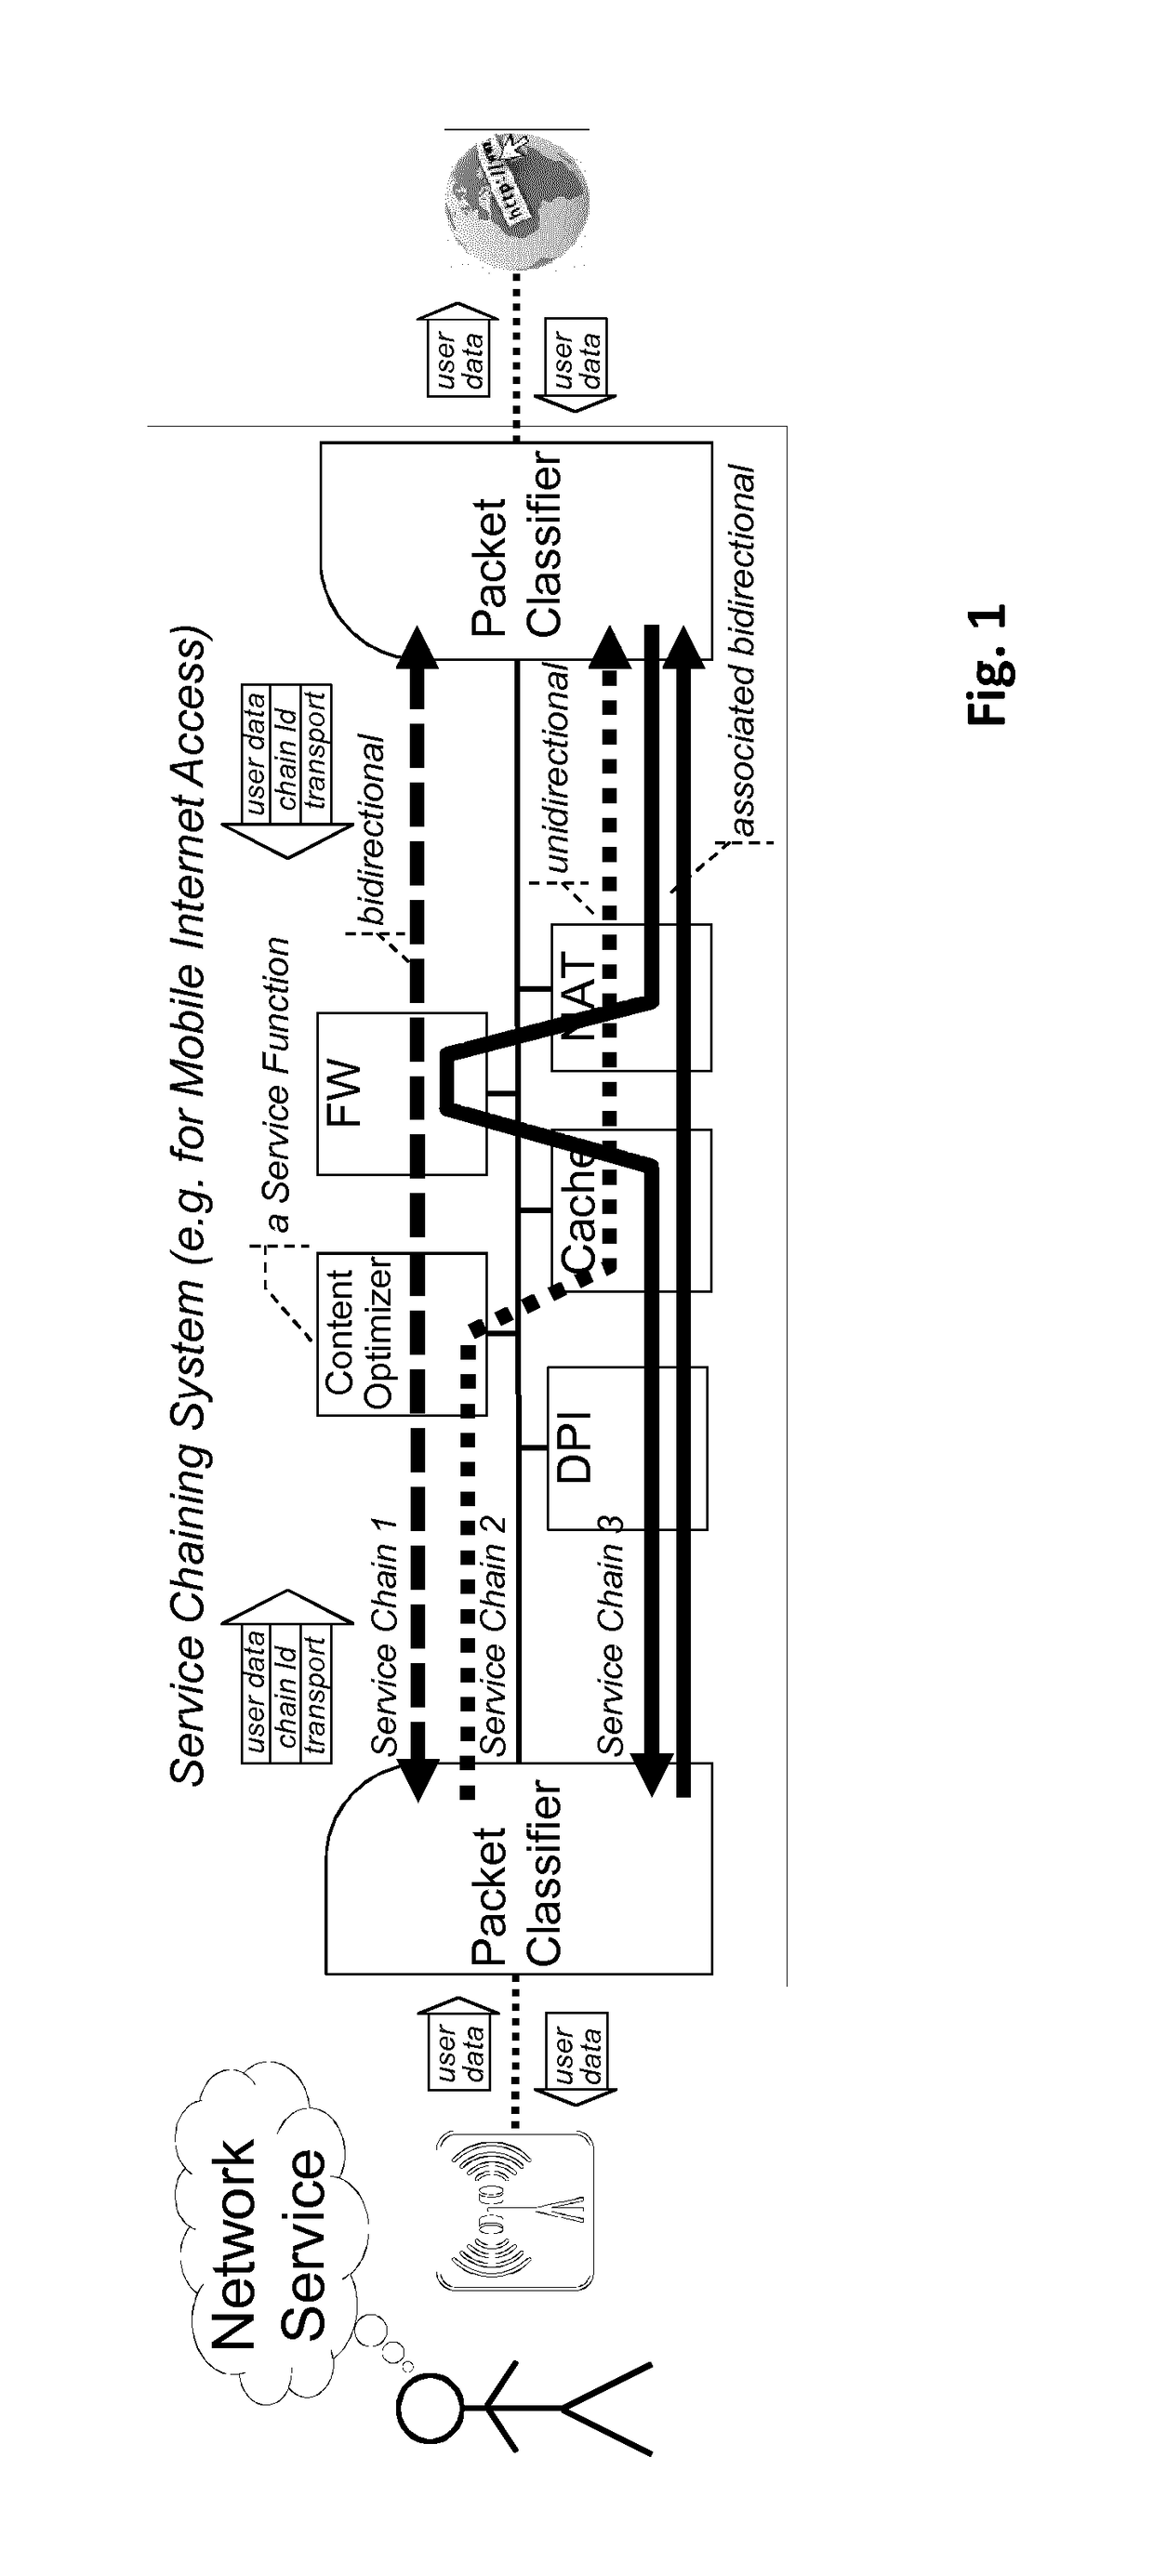 Chaining of network service functions in a communication network